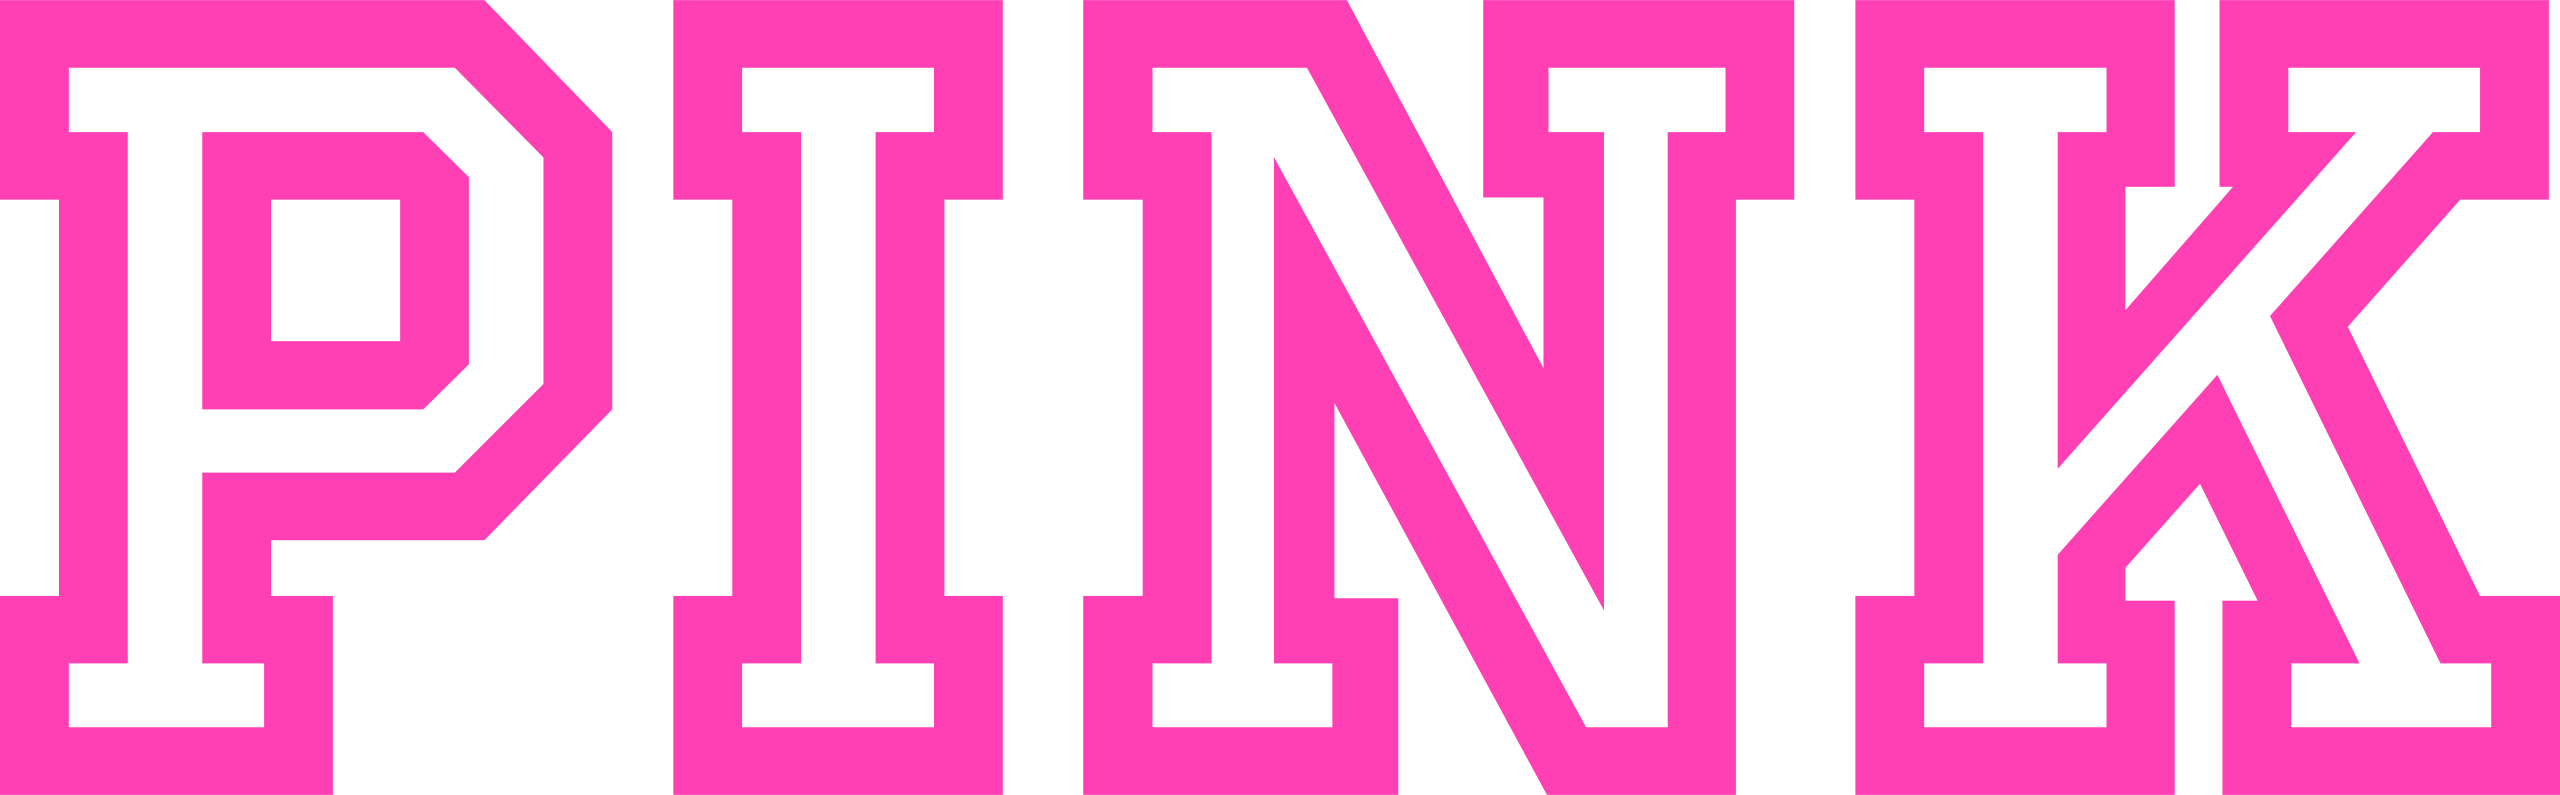 A Pink And Black Letter